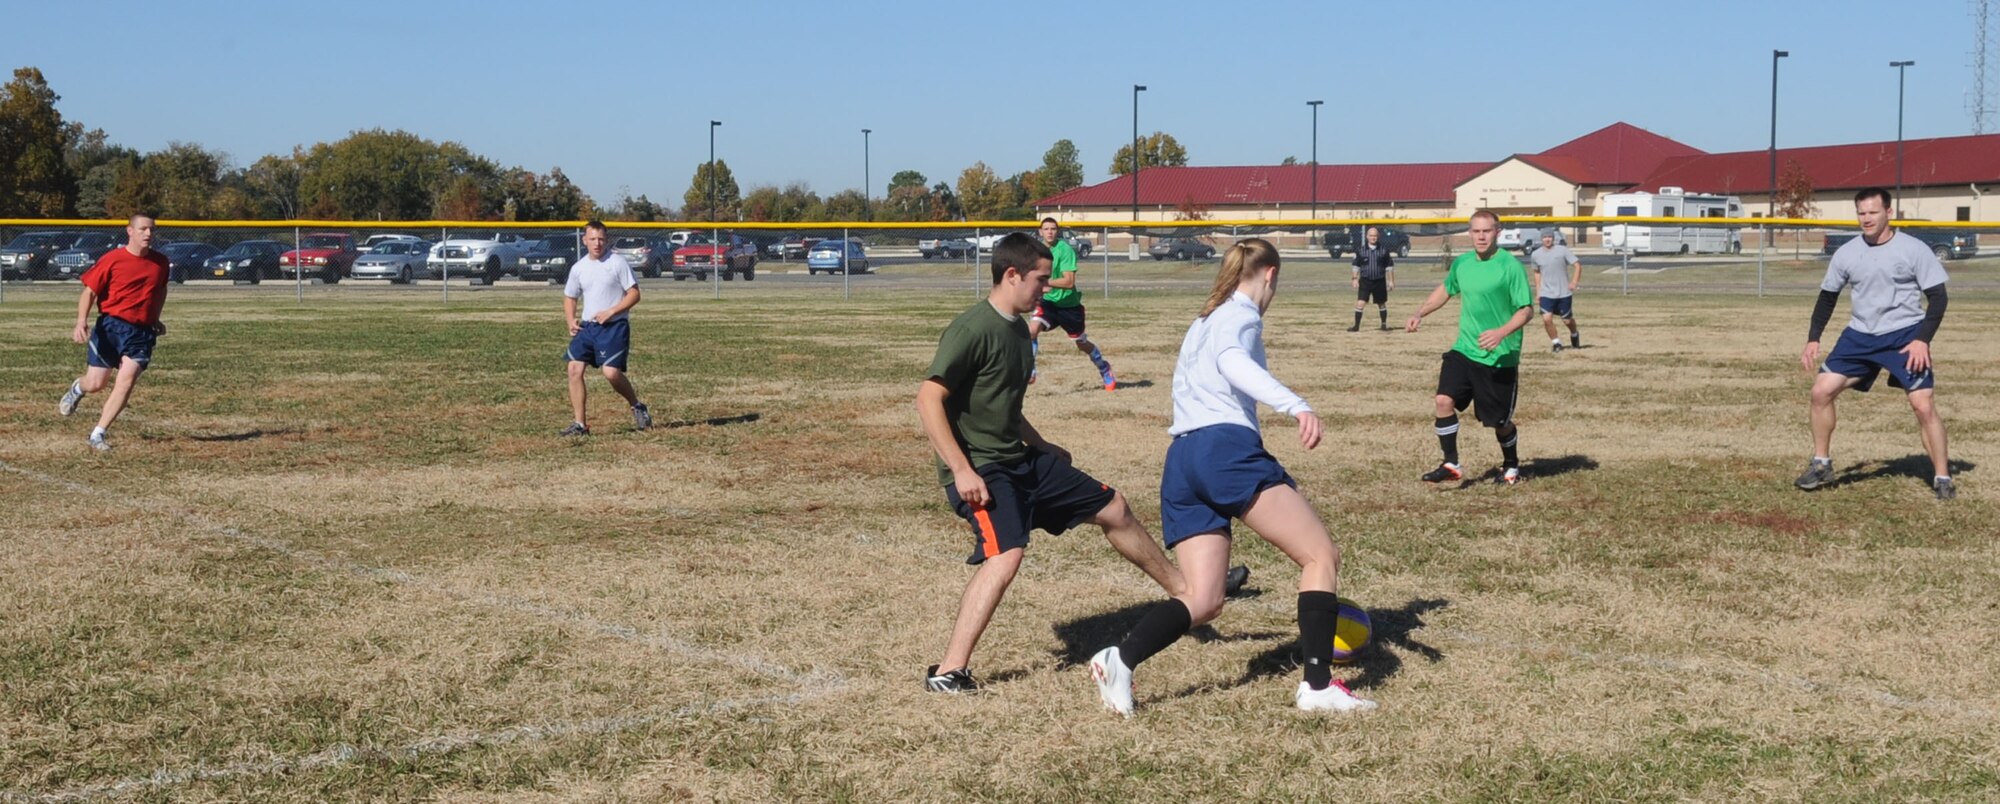 Members of the 2nd Operational Weather Squadron and 2nd Aircraft Maintenance Squadron play soccer during the 2012 Sports Day on Barksdale Air Force Base, La., Nov. 16. Sports Day consists of various team events including dodgeball, basketball, soccer, tug-of-war, volleyball, a homerun derby, flag football and racquetball. This day was designed to improve team work and help increase the awareness of fitness, sports programs and boost morale. (U.S. Air Force photo/ Senior Airman Kristin High)(RELEASED)
